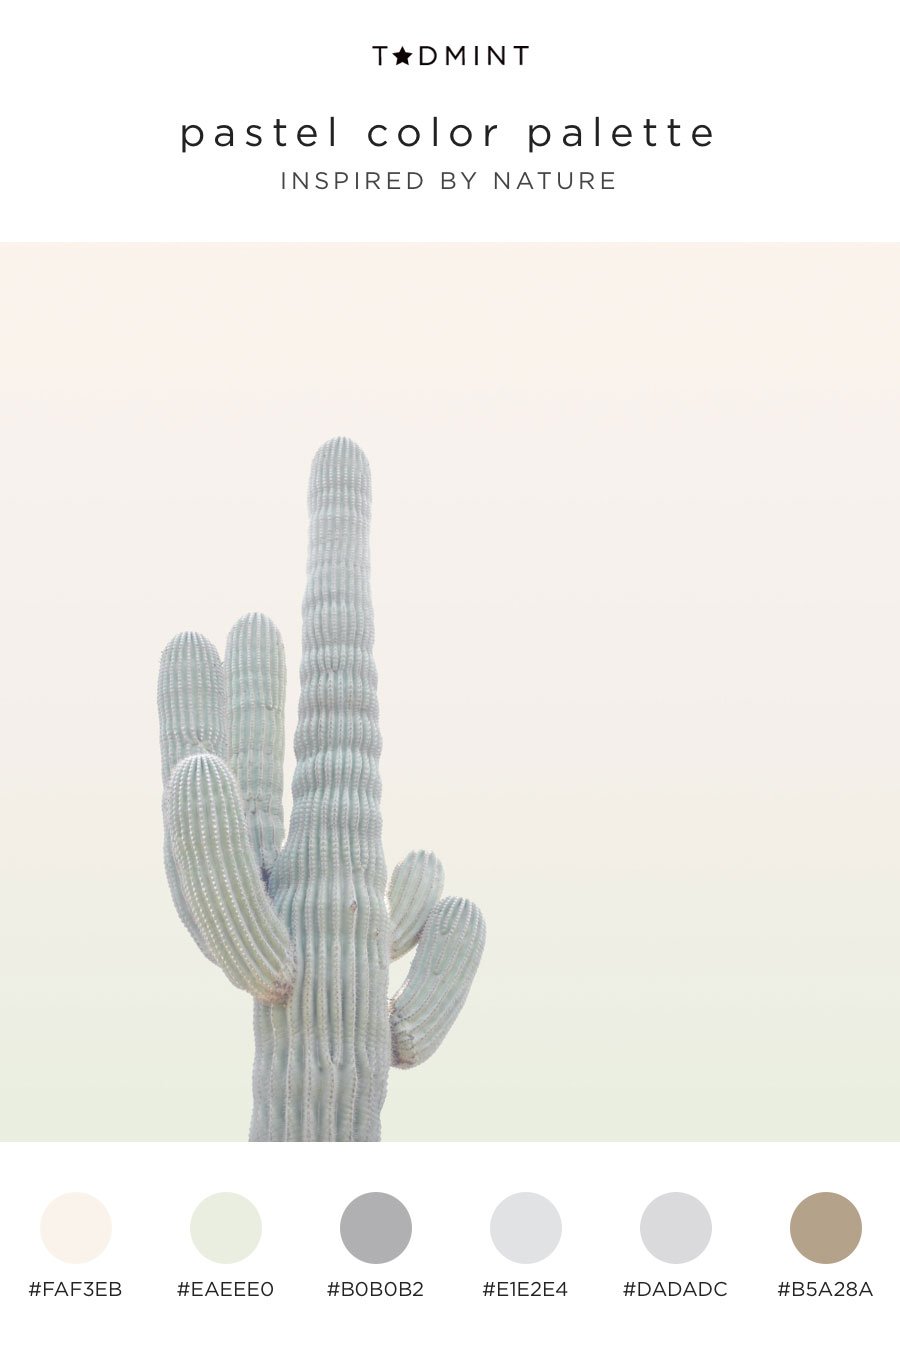 pastel colors inspired by a cactus